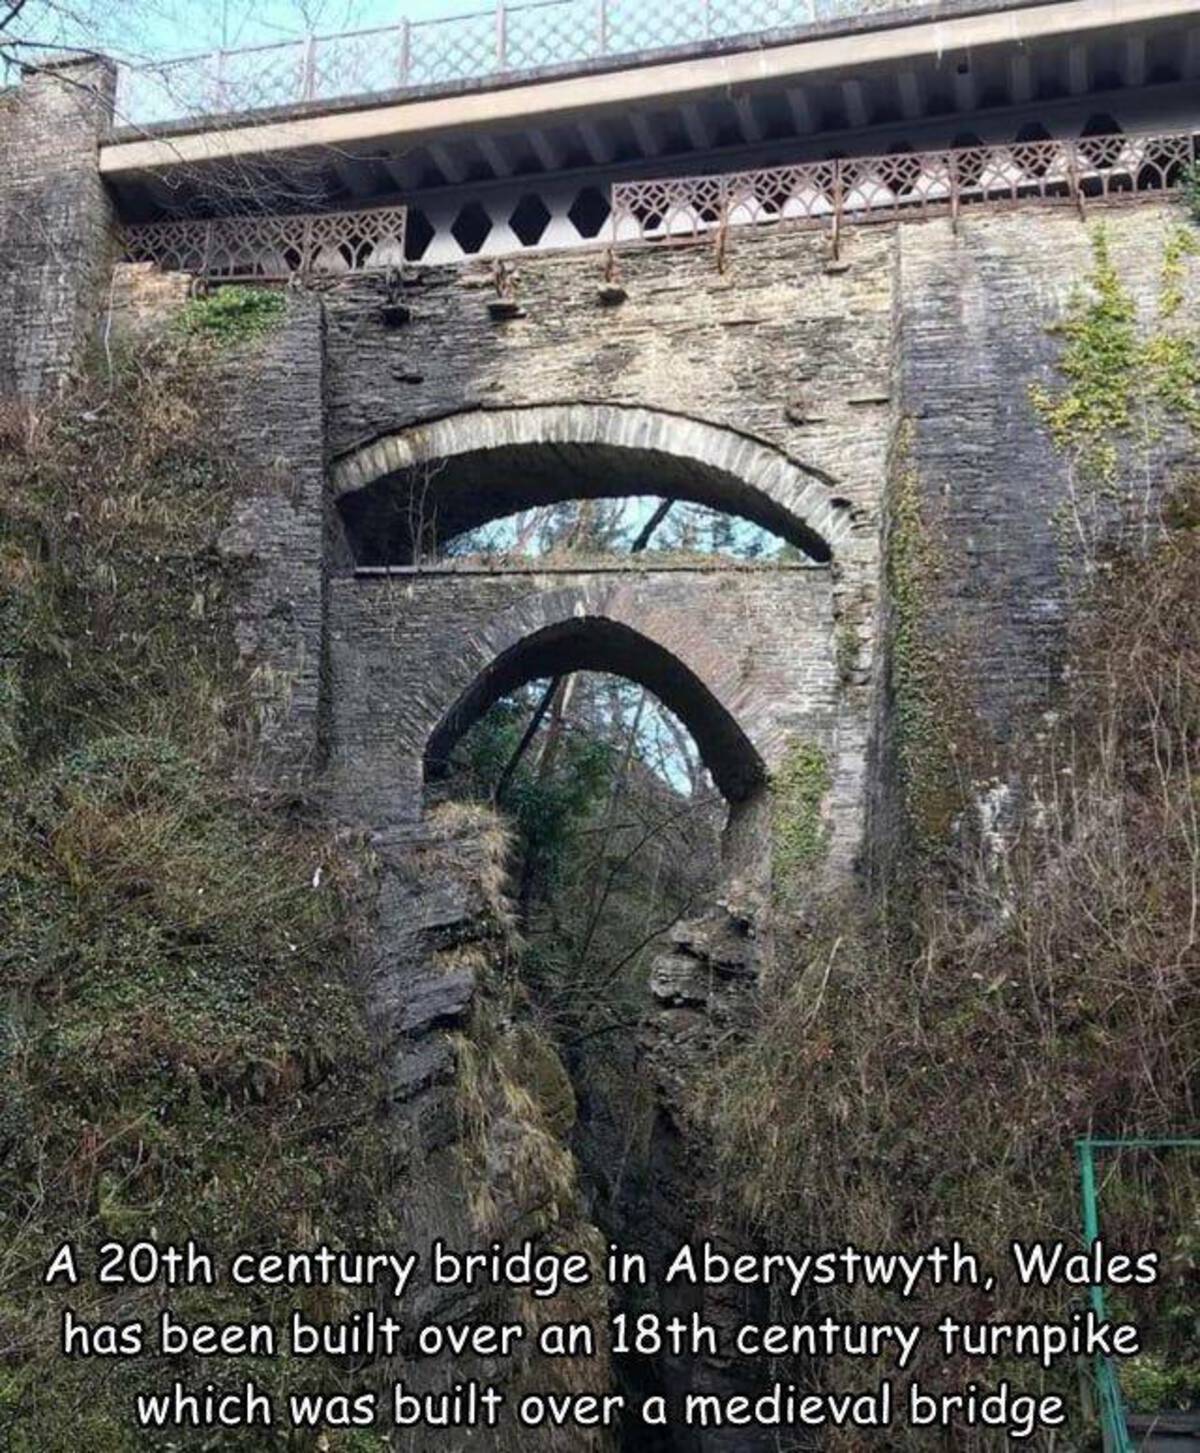 devil's bridge falls - A 20th century bridge in Aberystwyth, Wales has been built over an 18th century turnpike which was built over a medieval bridge